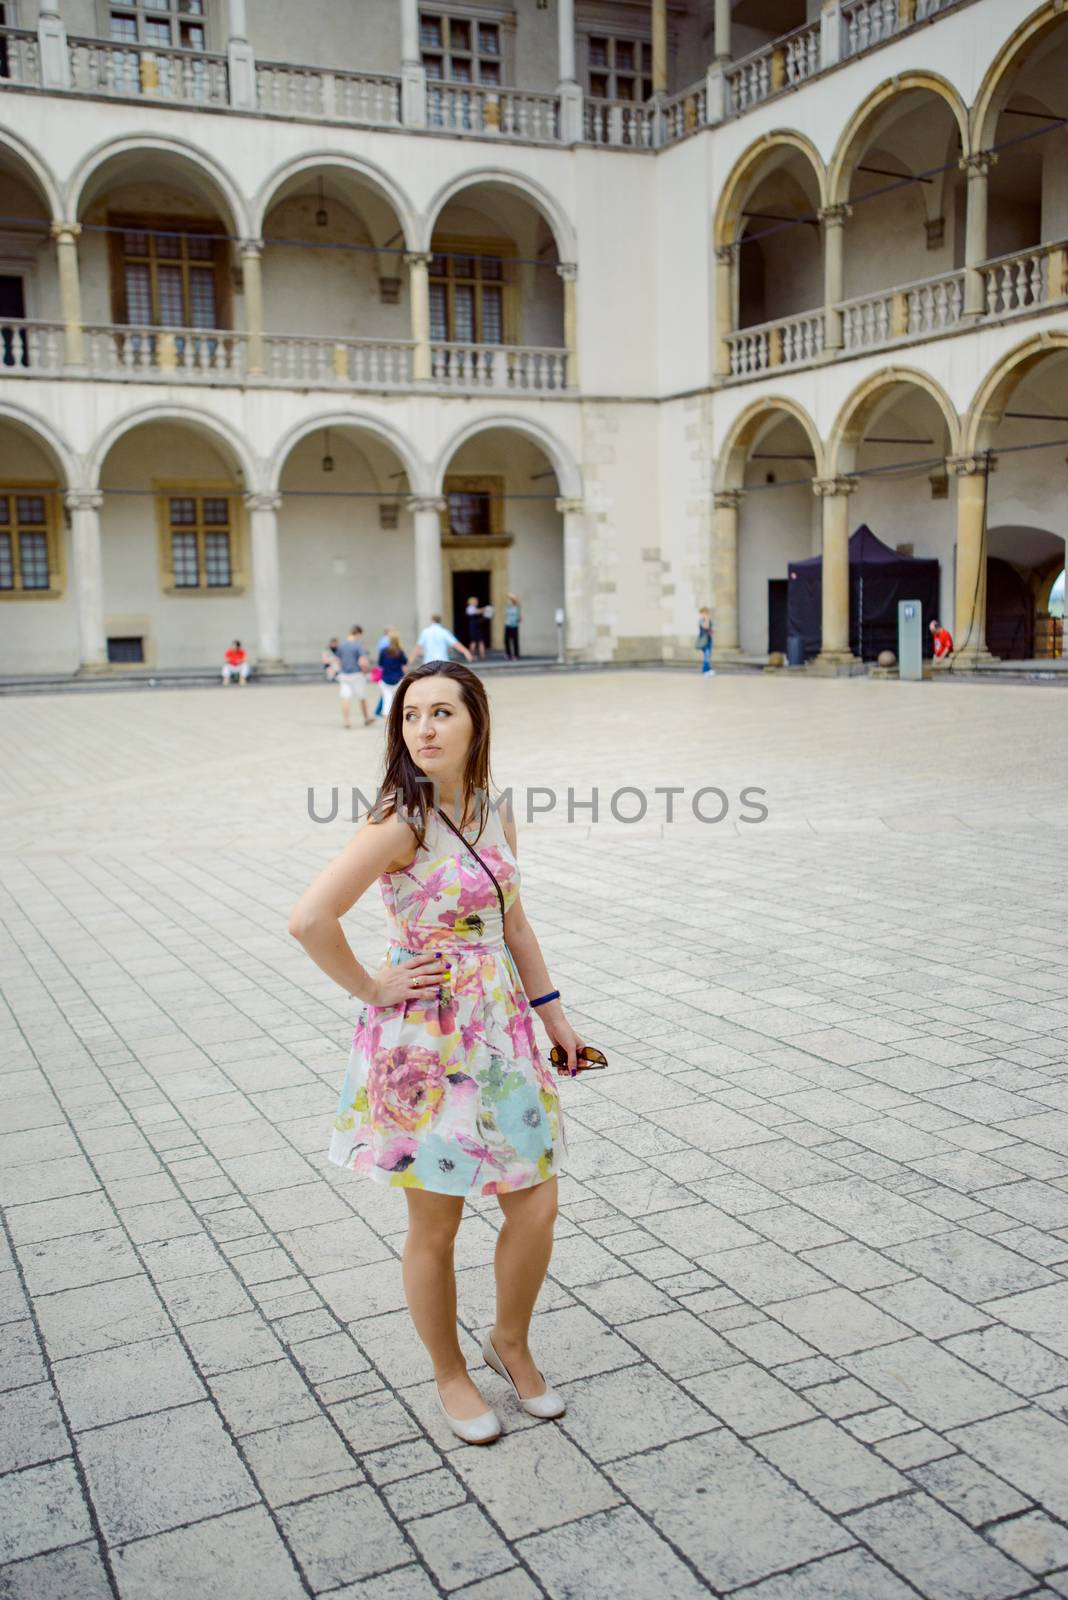 Beautiful girl during sightseeing old castle in Cracow, Wawel. Summer time